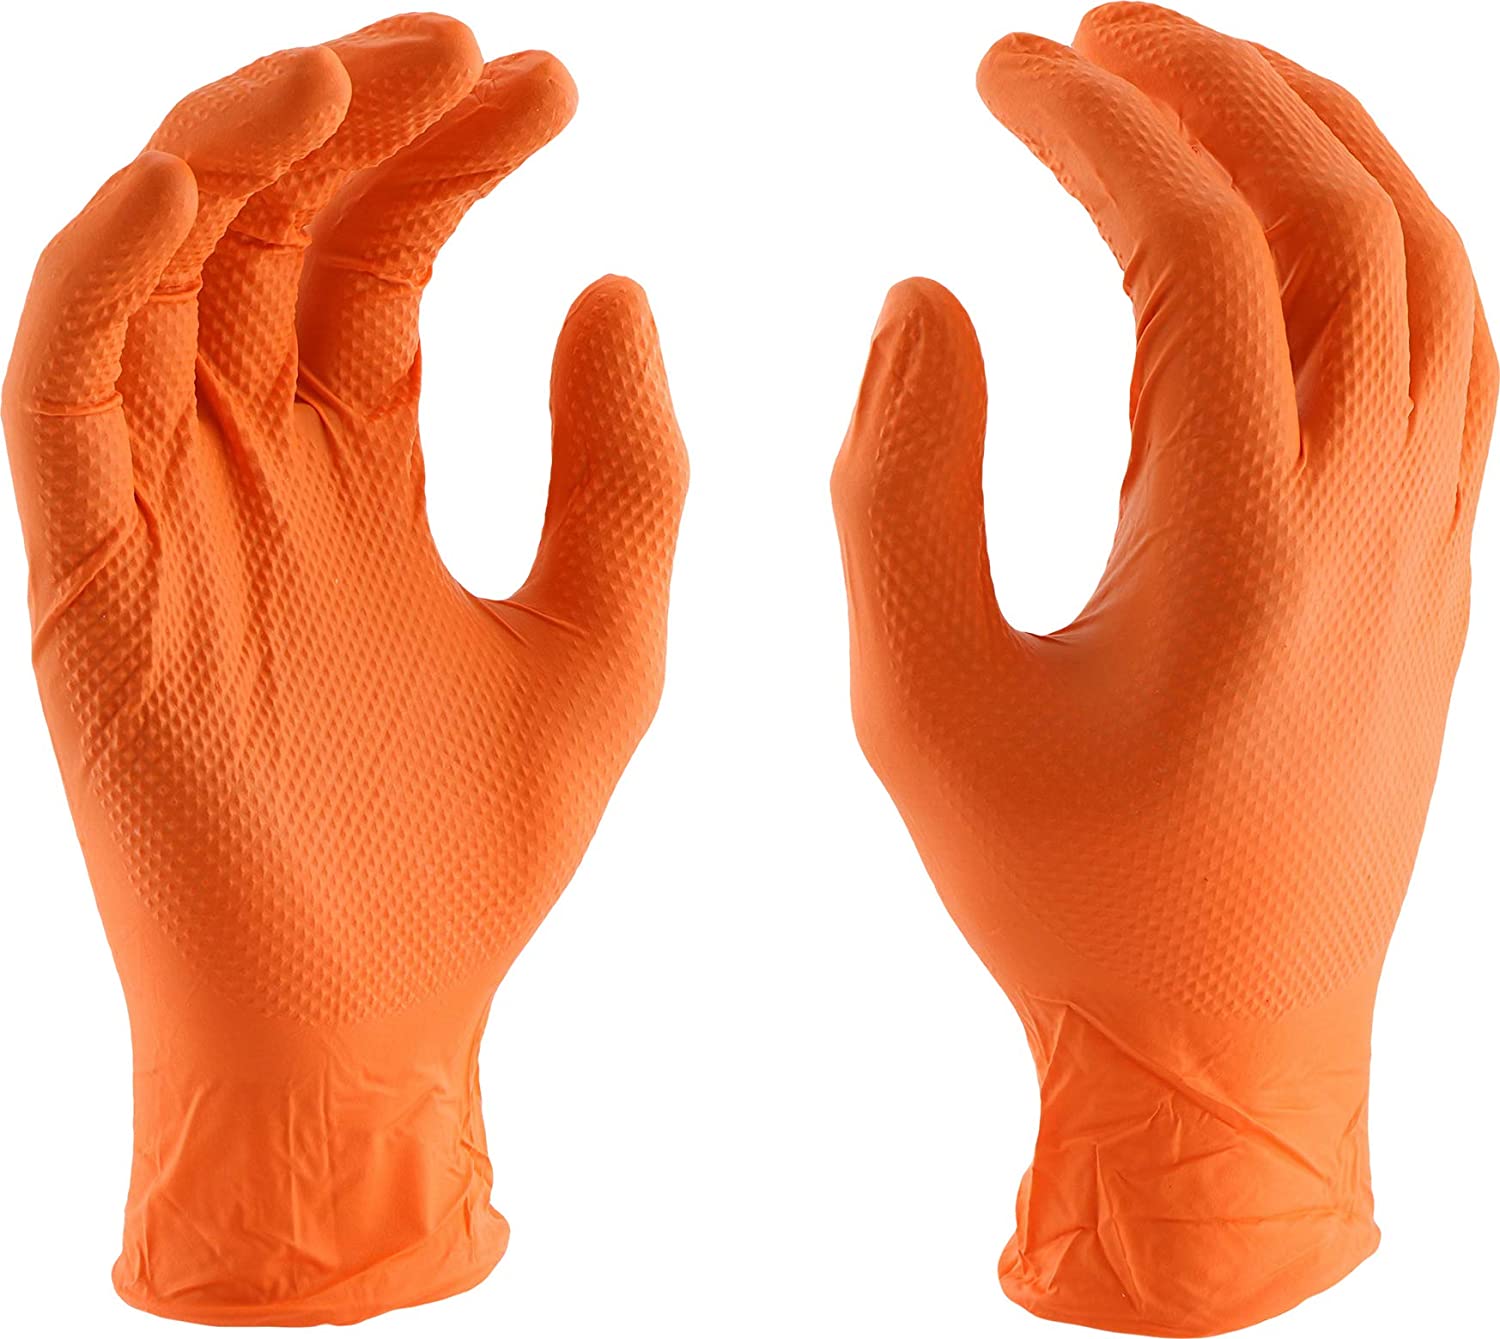 West Chester 2940 Industrial Grade Textured Disposable Nitrile Gloves, 7 mil, Powder Free: Orange, Large, Box of 100